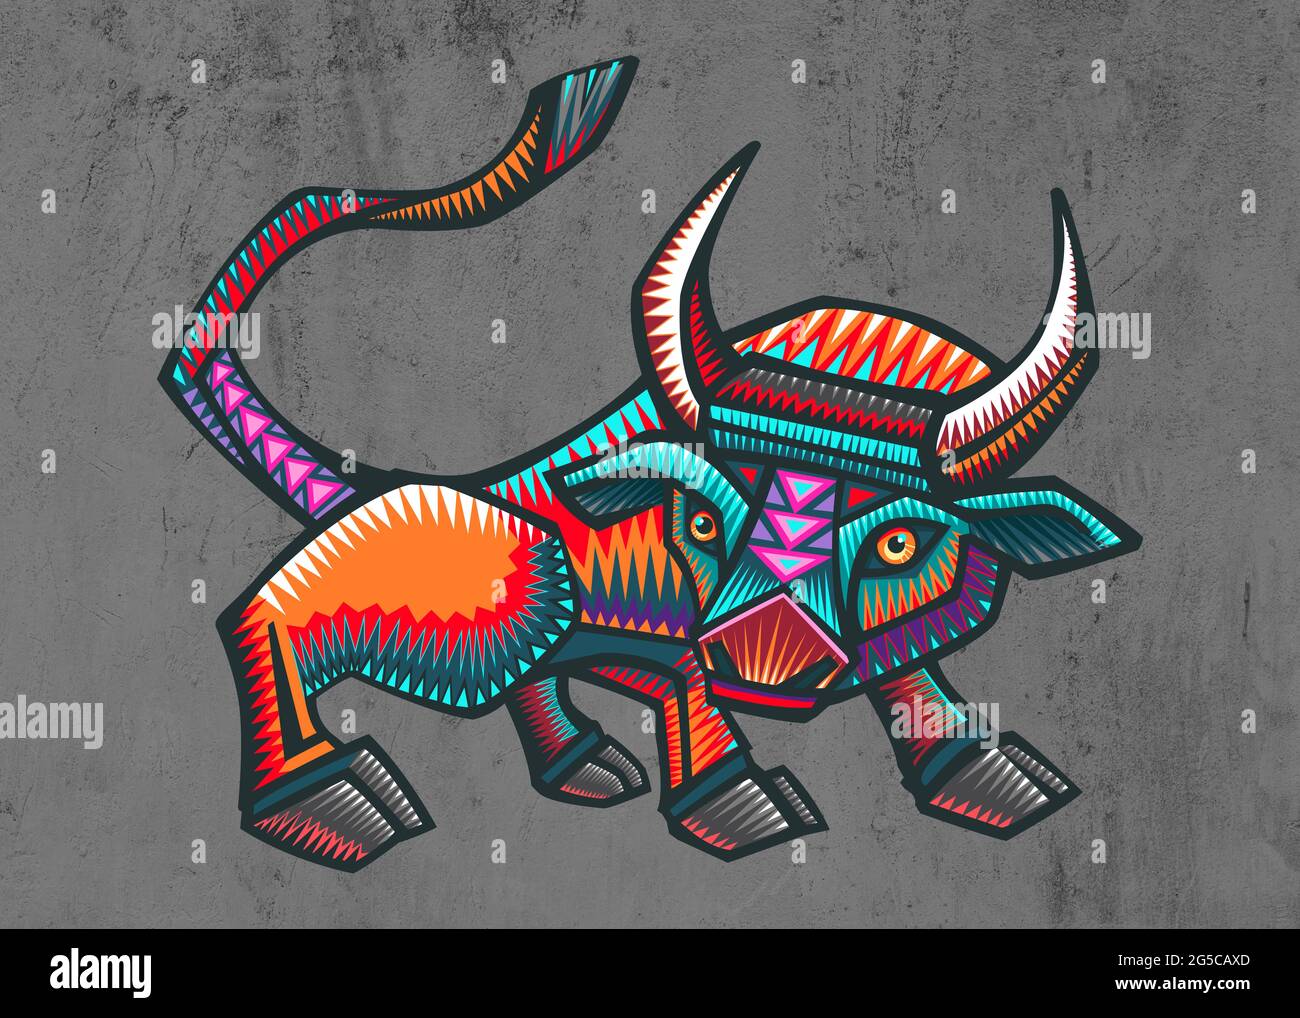 Hand drawn illustration or drawing of a colorful mexican indigenous bull in a traditional alebrije style Stock Photo